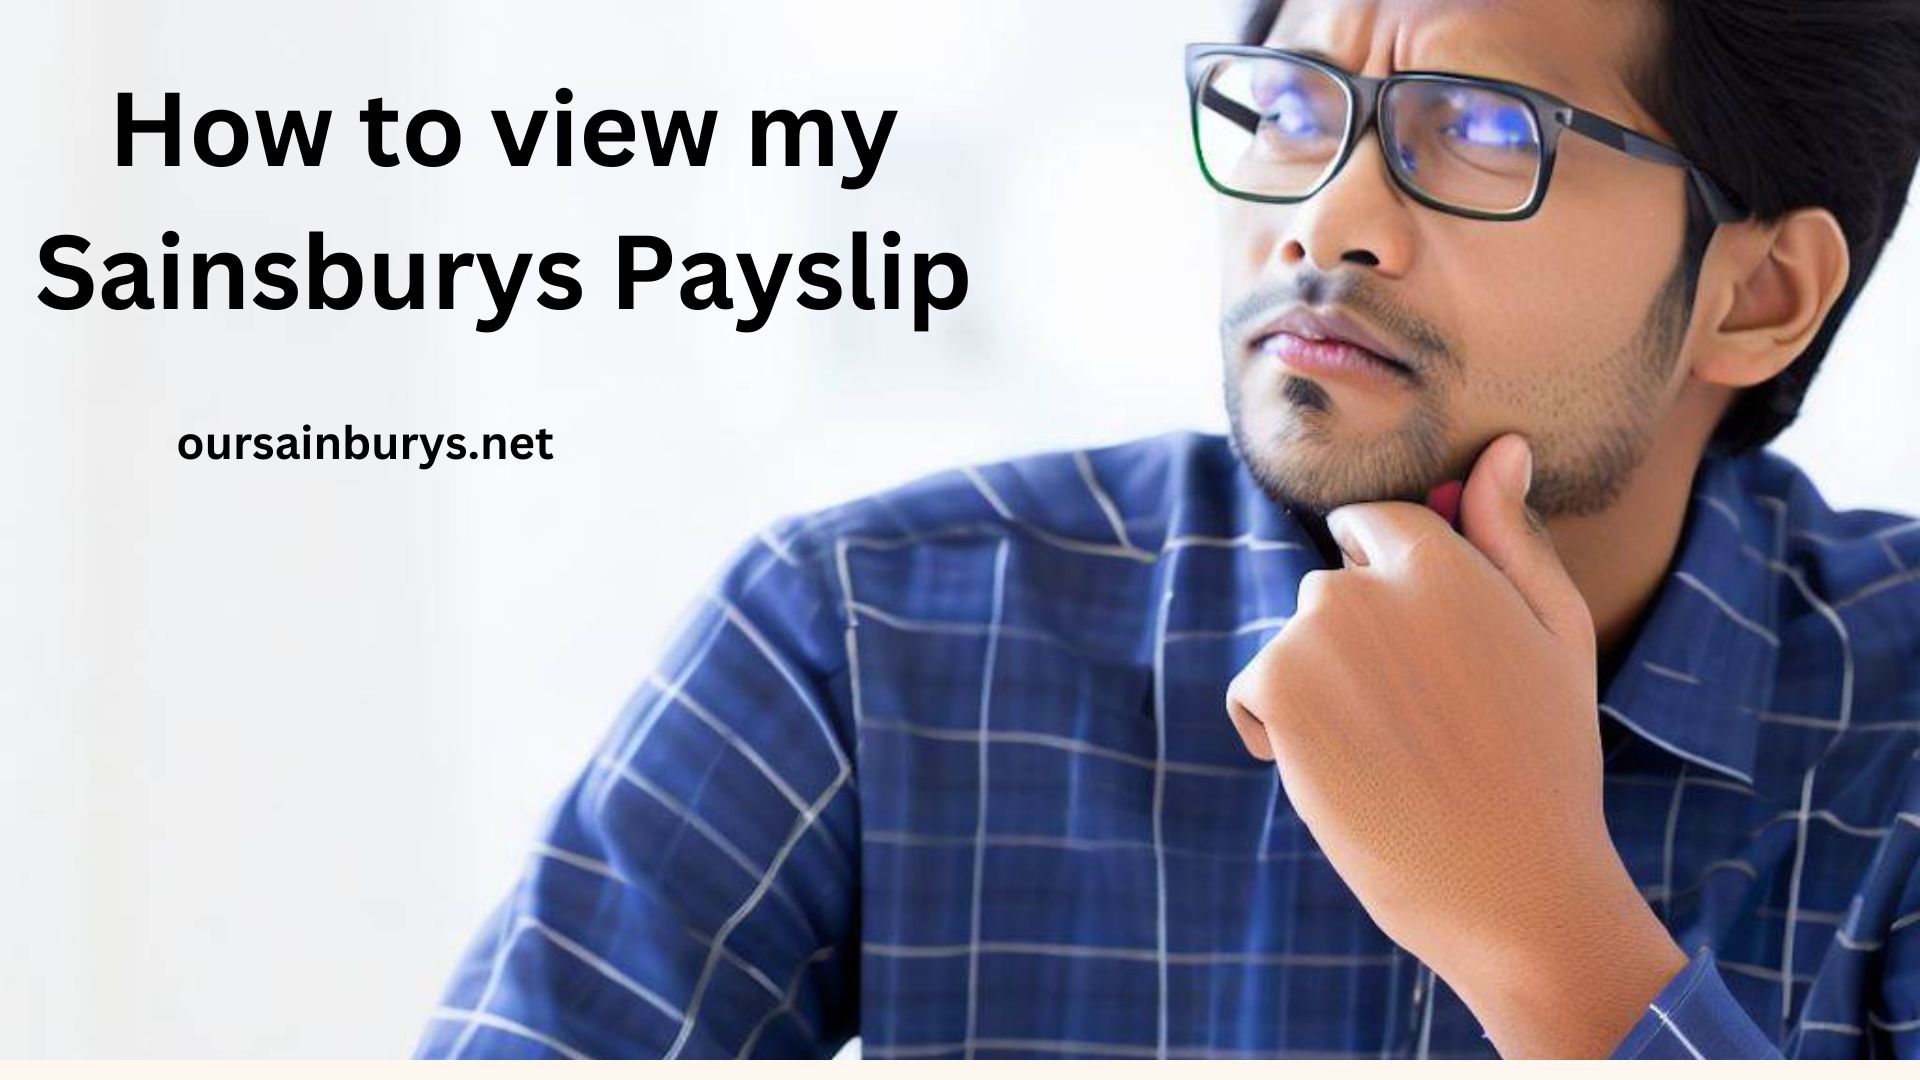 How to View Your Sainsburys Payslip